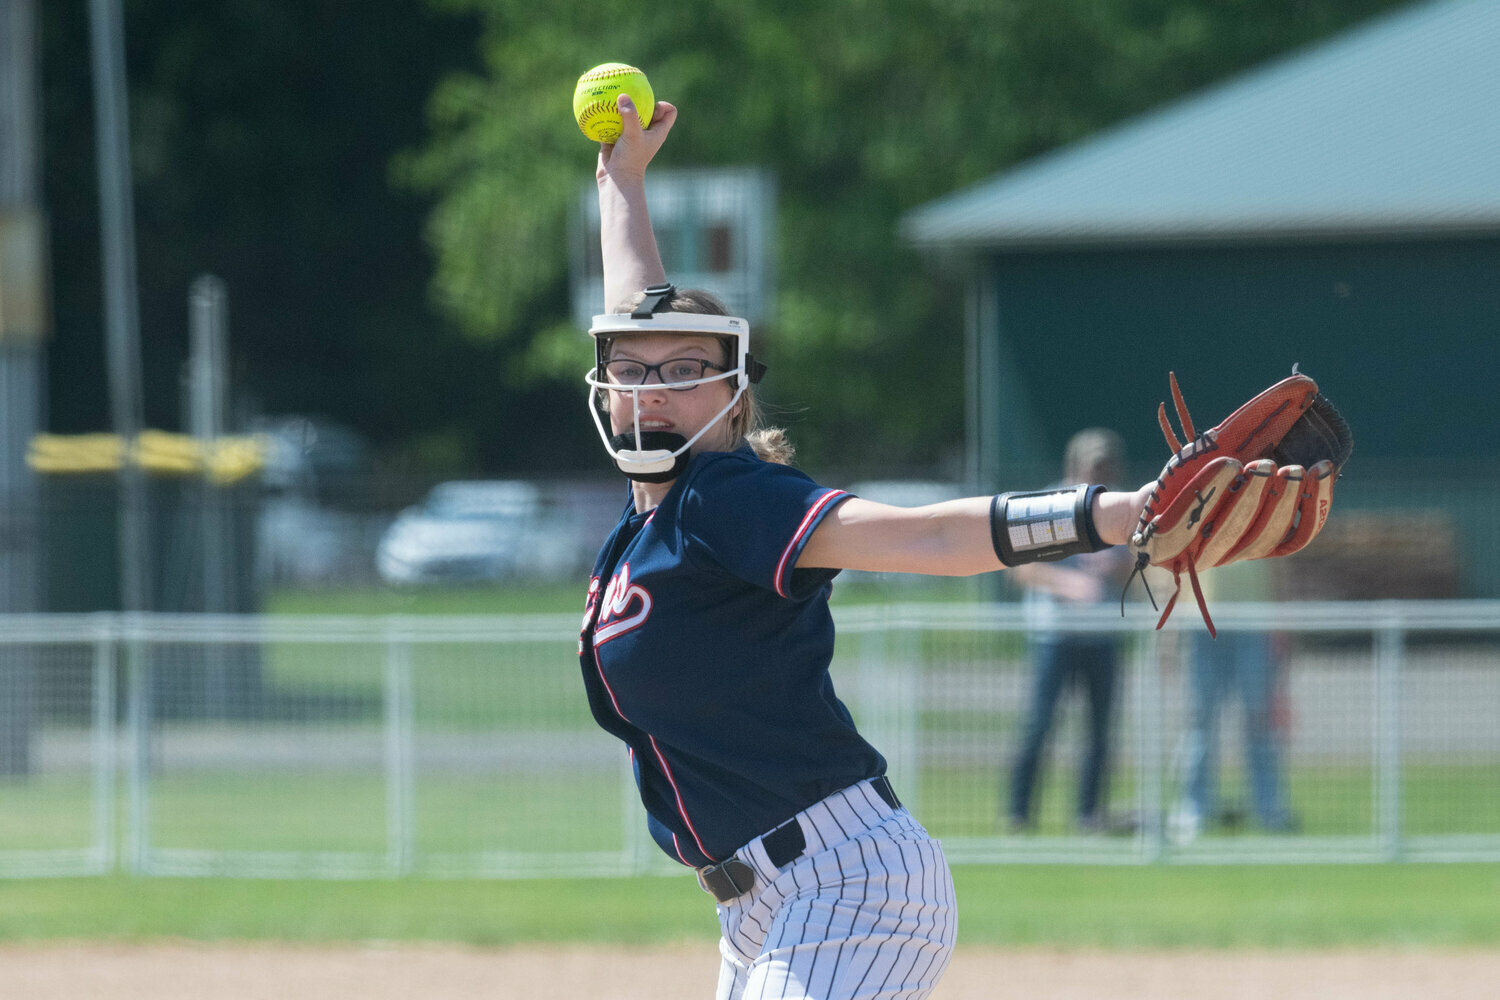 Lauren Emery throws a pitch during PWV's 12-1 win over Raymond-South Bend in a winner-to-state game at the 2B district tournament, May 20 at Fort Borst.